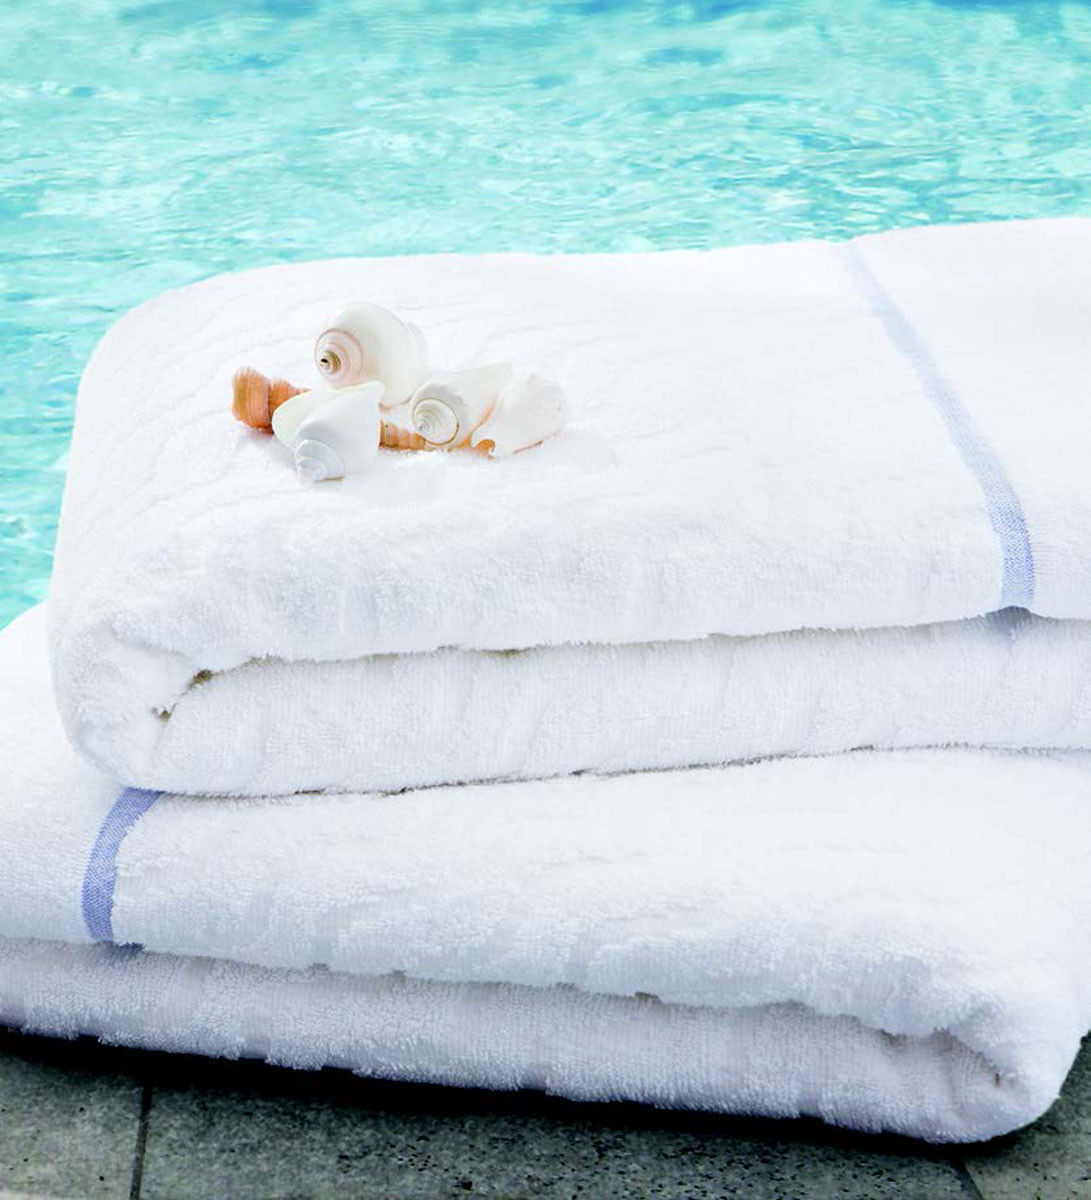 Which types of eurospa towels are included in the EuroSpa Pool Towels collection?